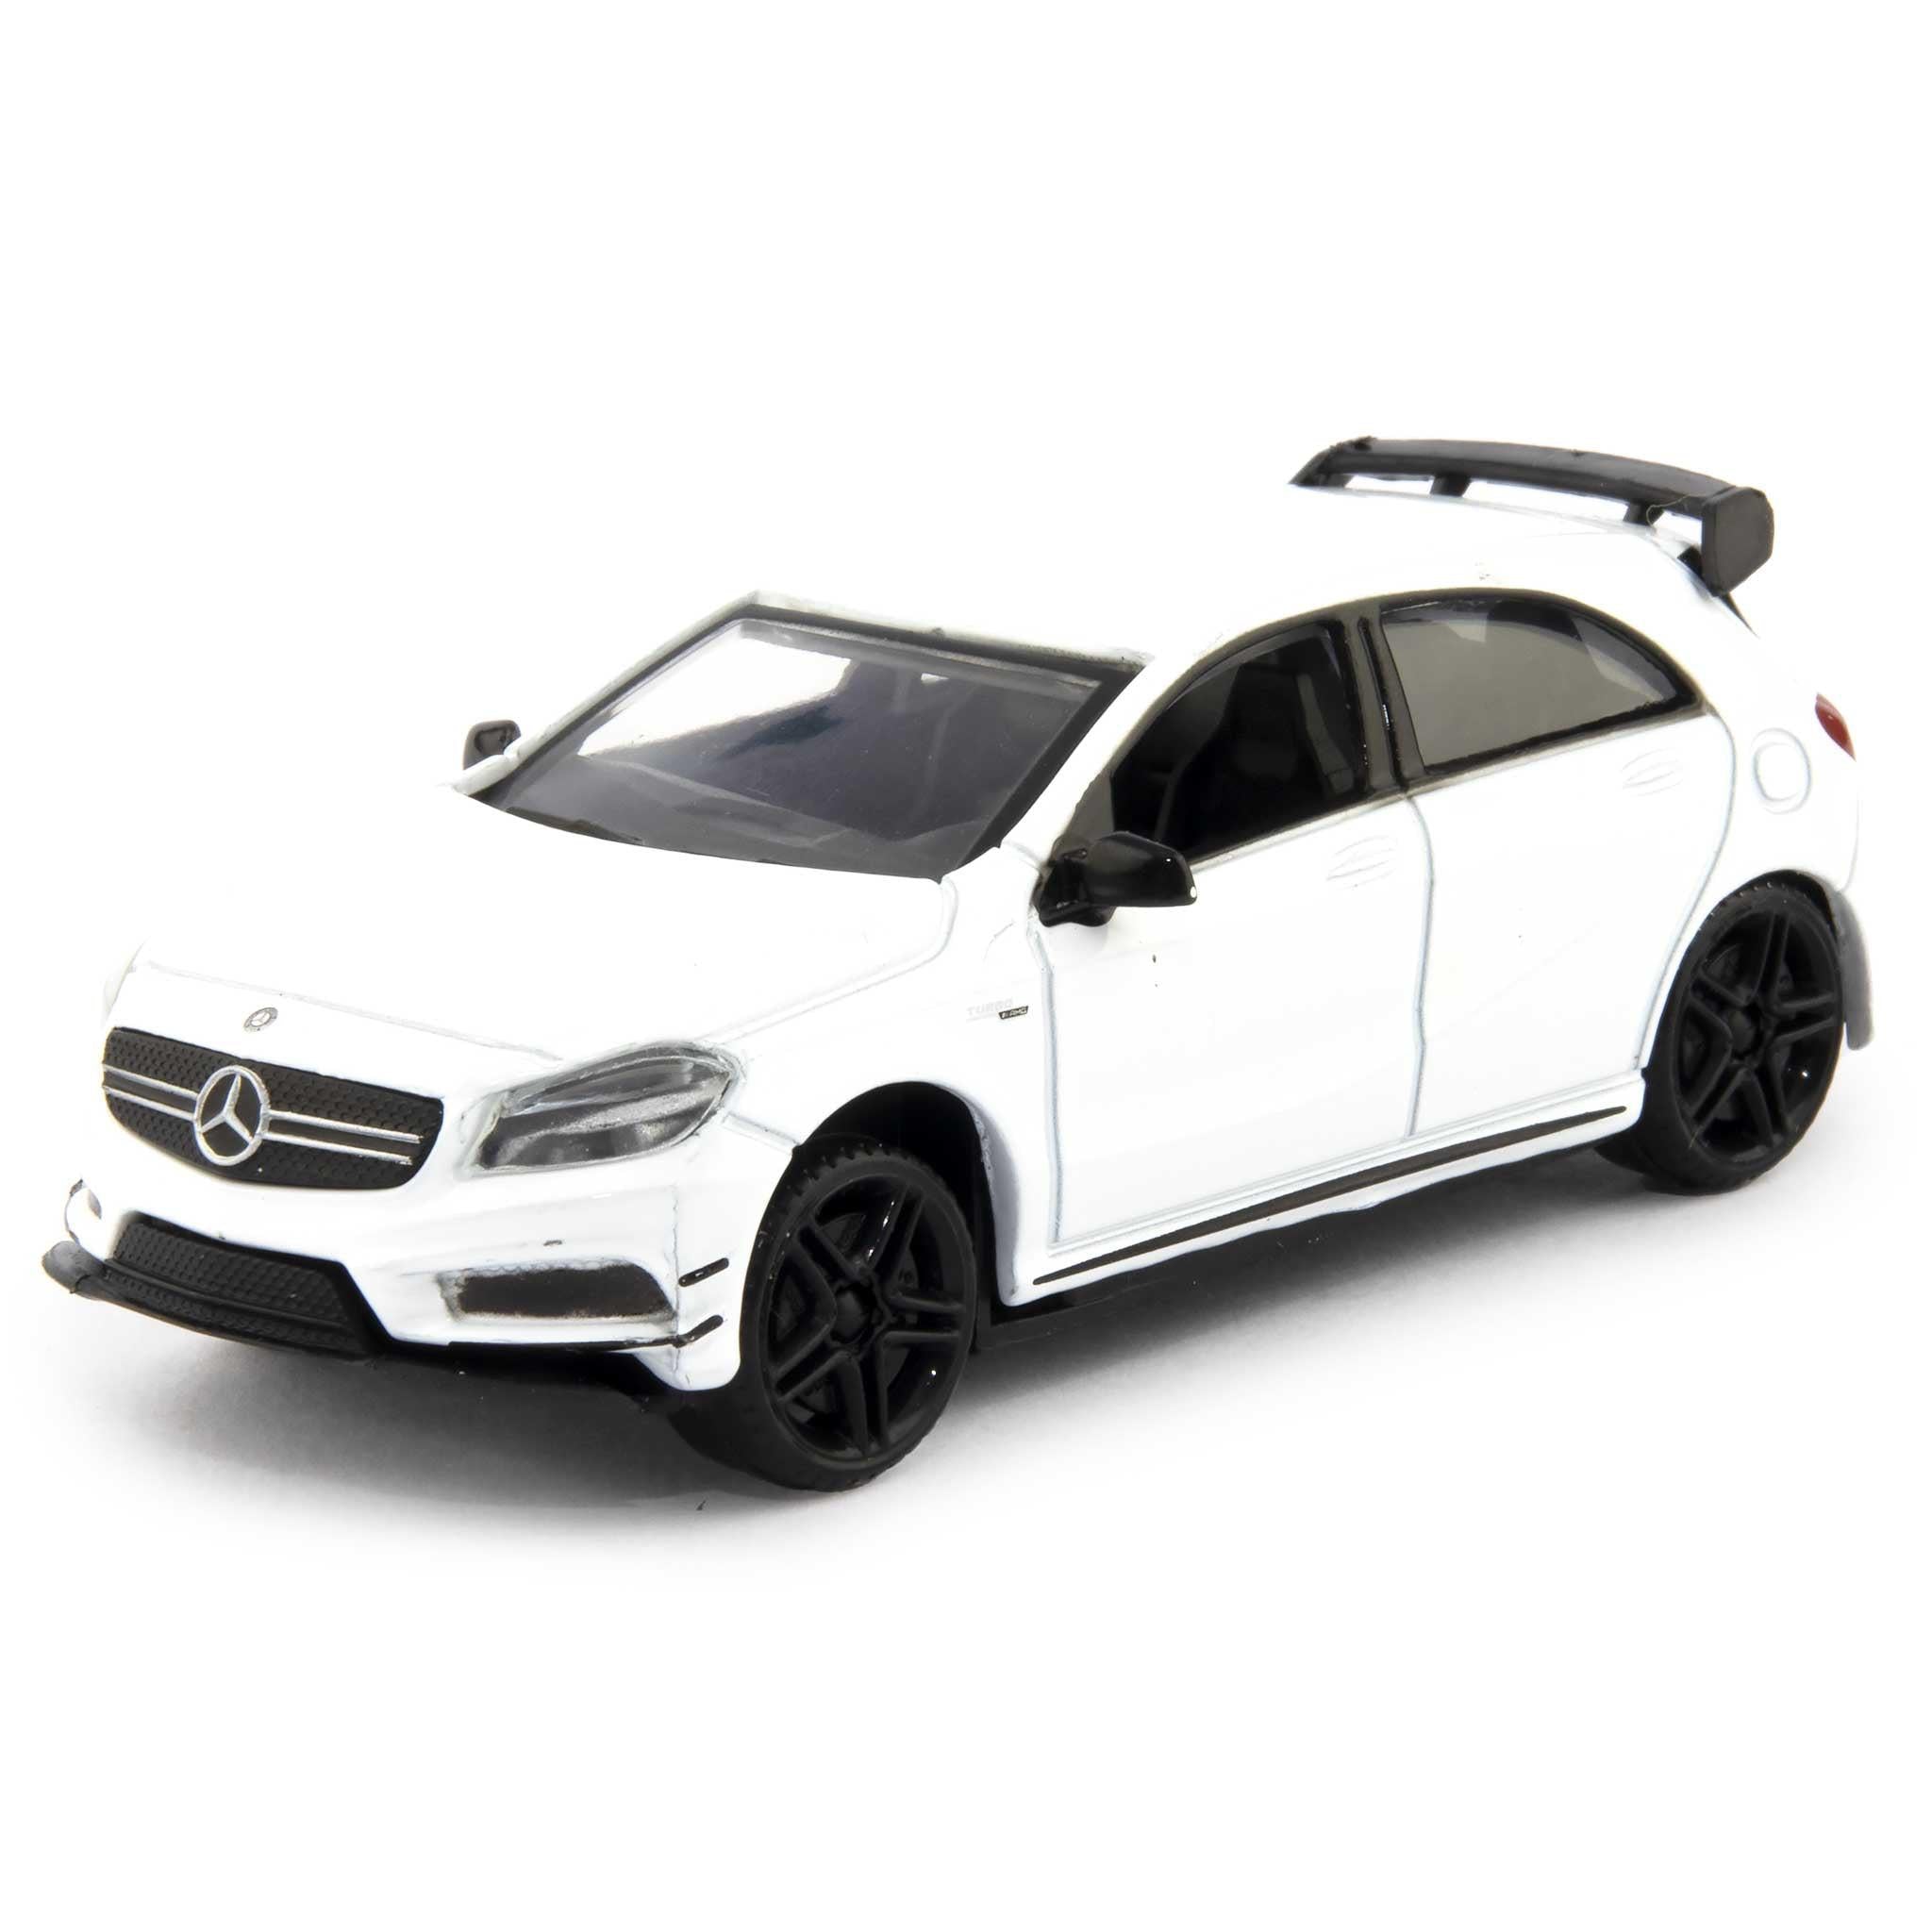 Mercedes-Benz AMG A45 Diecast Toy Car white - 1:43 Scale